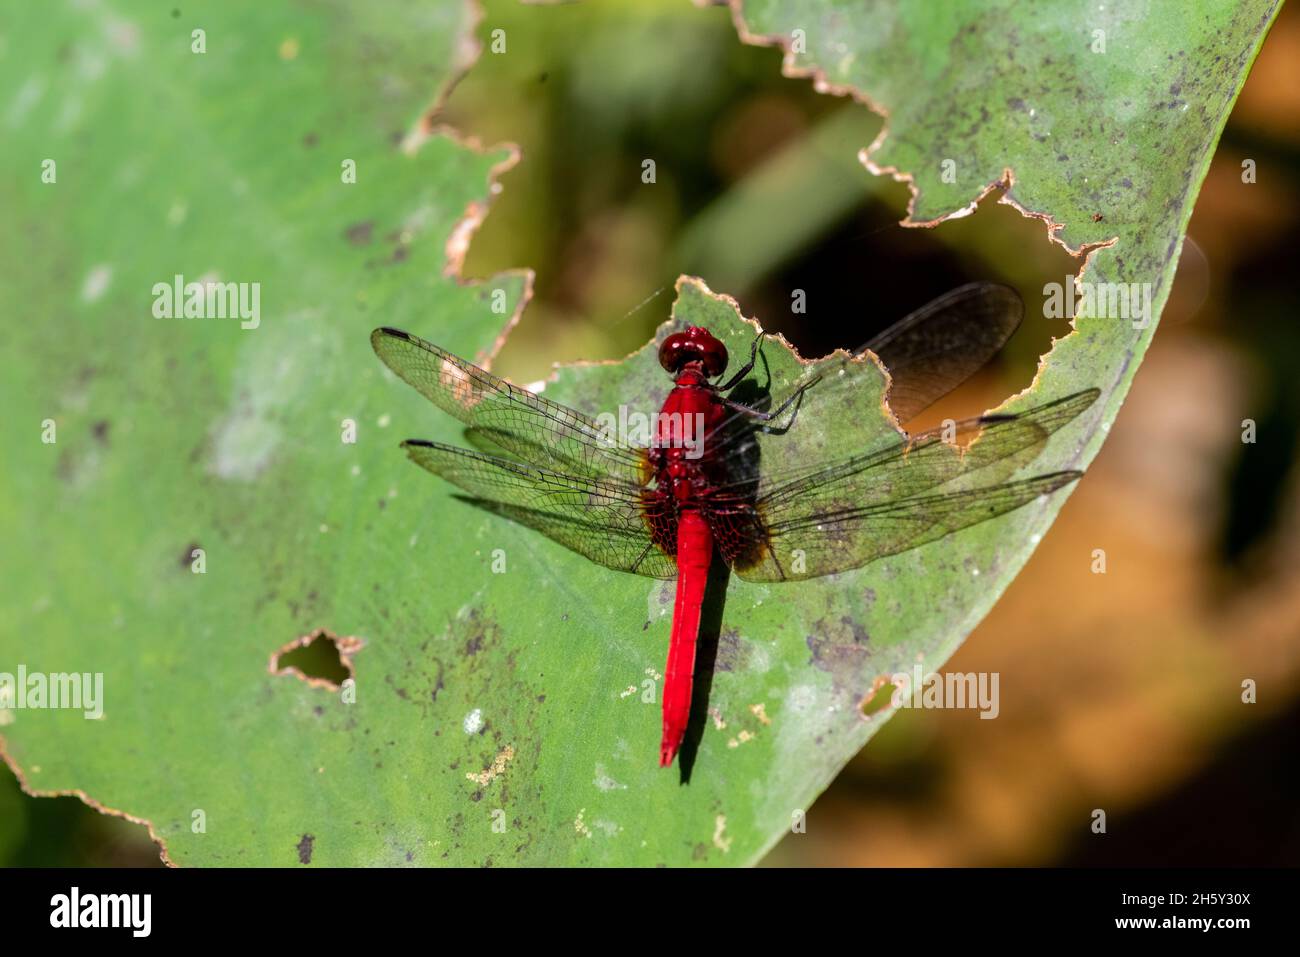 amazonian red dragonfly Stock Photo